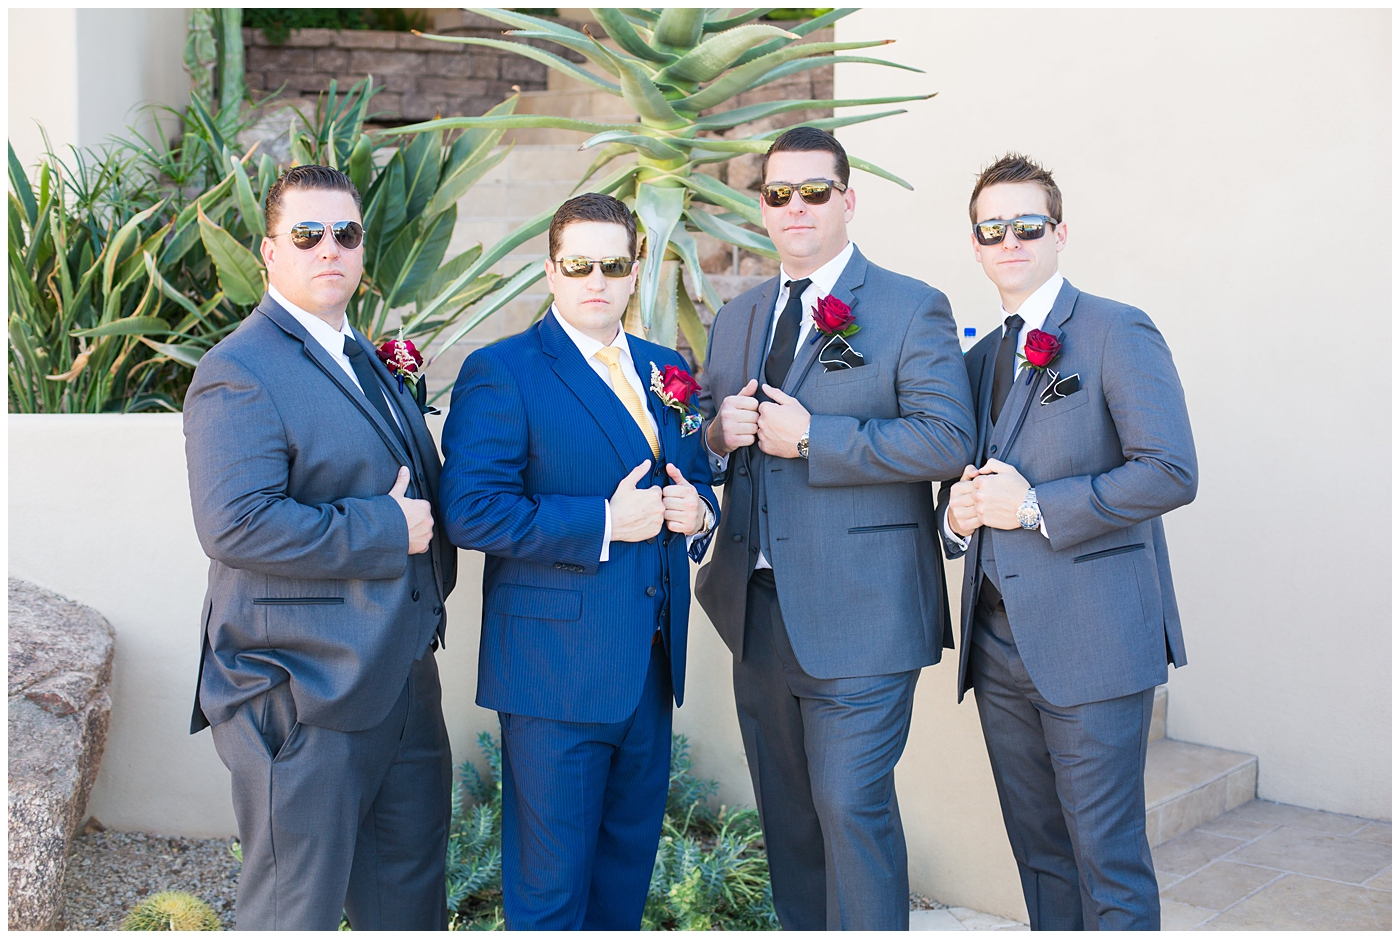 groom in blue suit with yellow tie and red rose boutonniere and groomsmen in gray suits